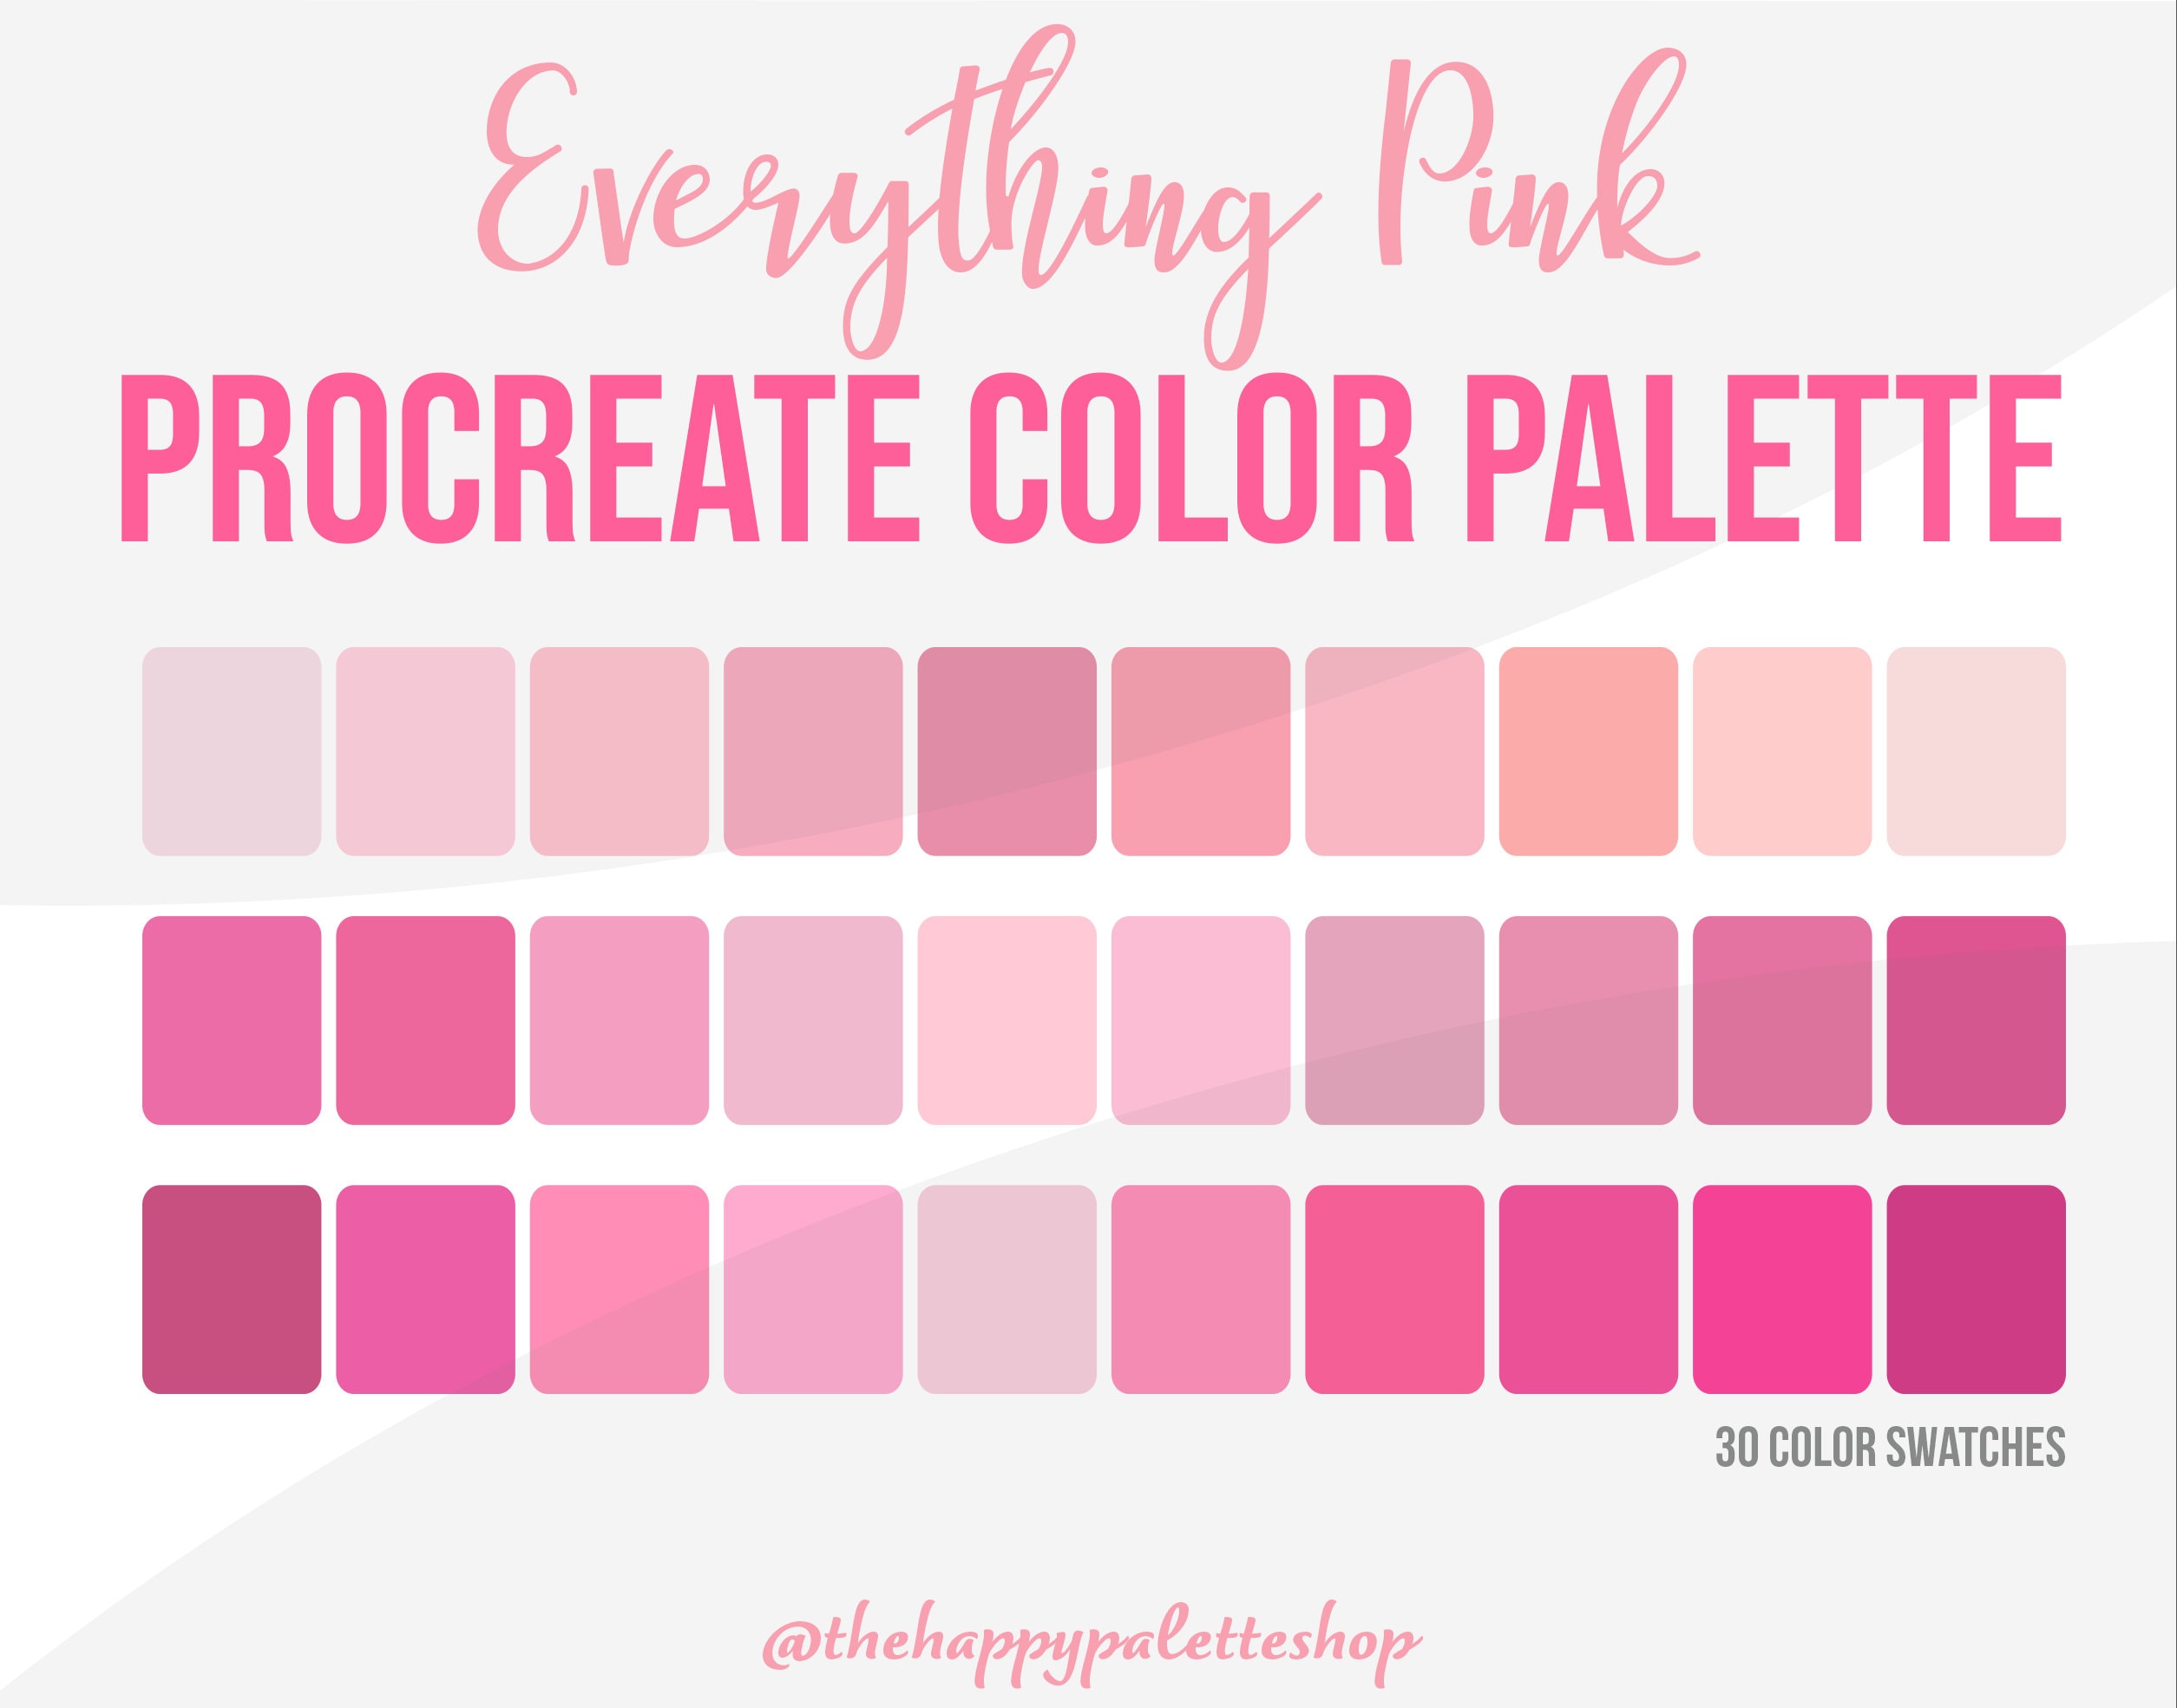 The Pink Palette